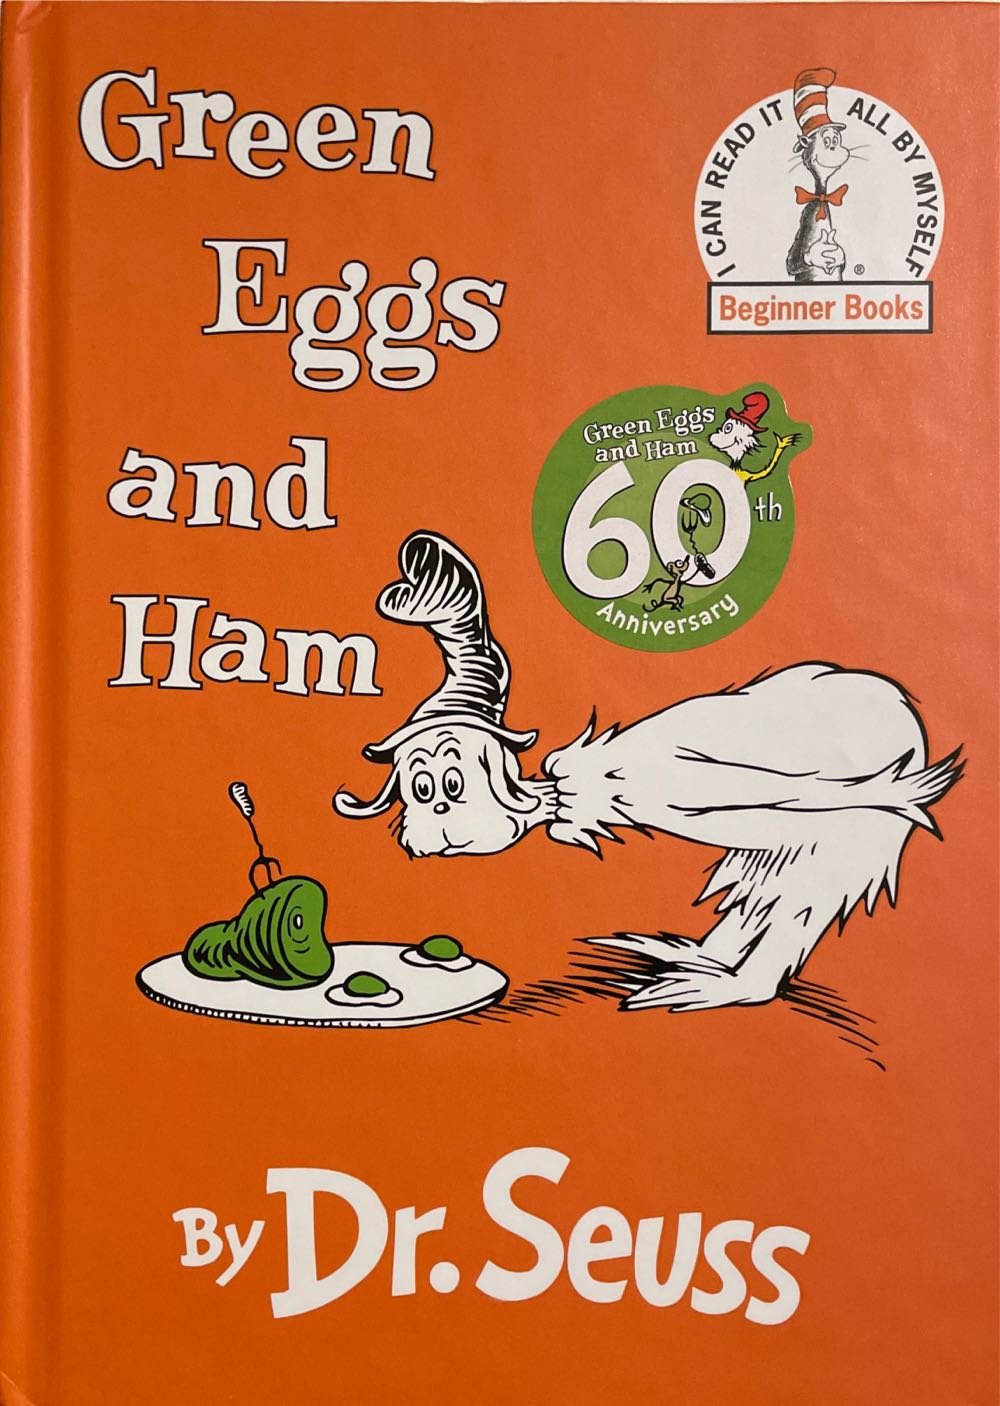 Green Eggs and Ham - Dr. Seuss (Random House - Hardcover) book collectible [Barcode 9780394800165] - Main Image 3